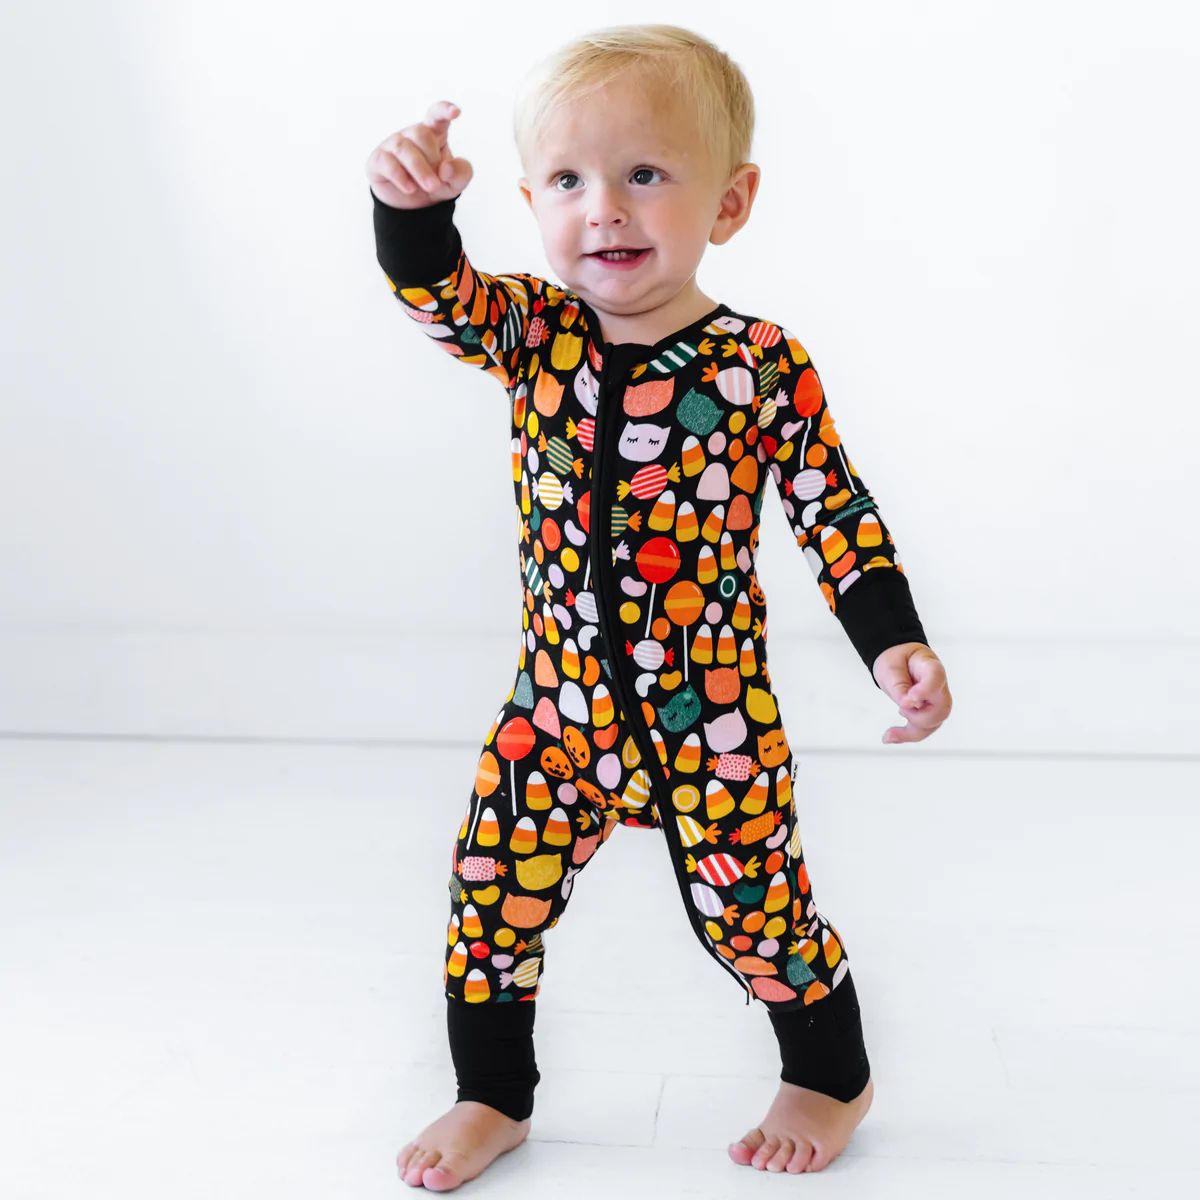 Baby Clothes, Baby Outfits | Little Sleepies